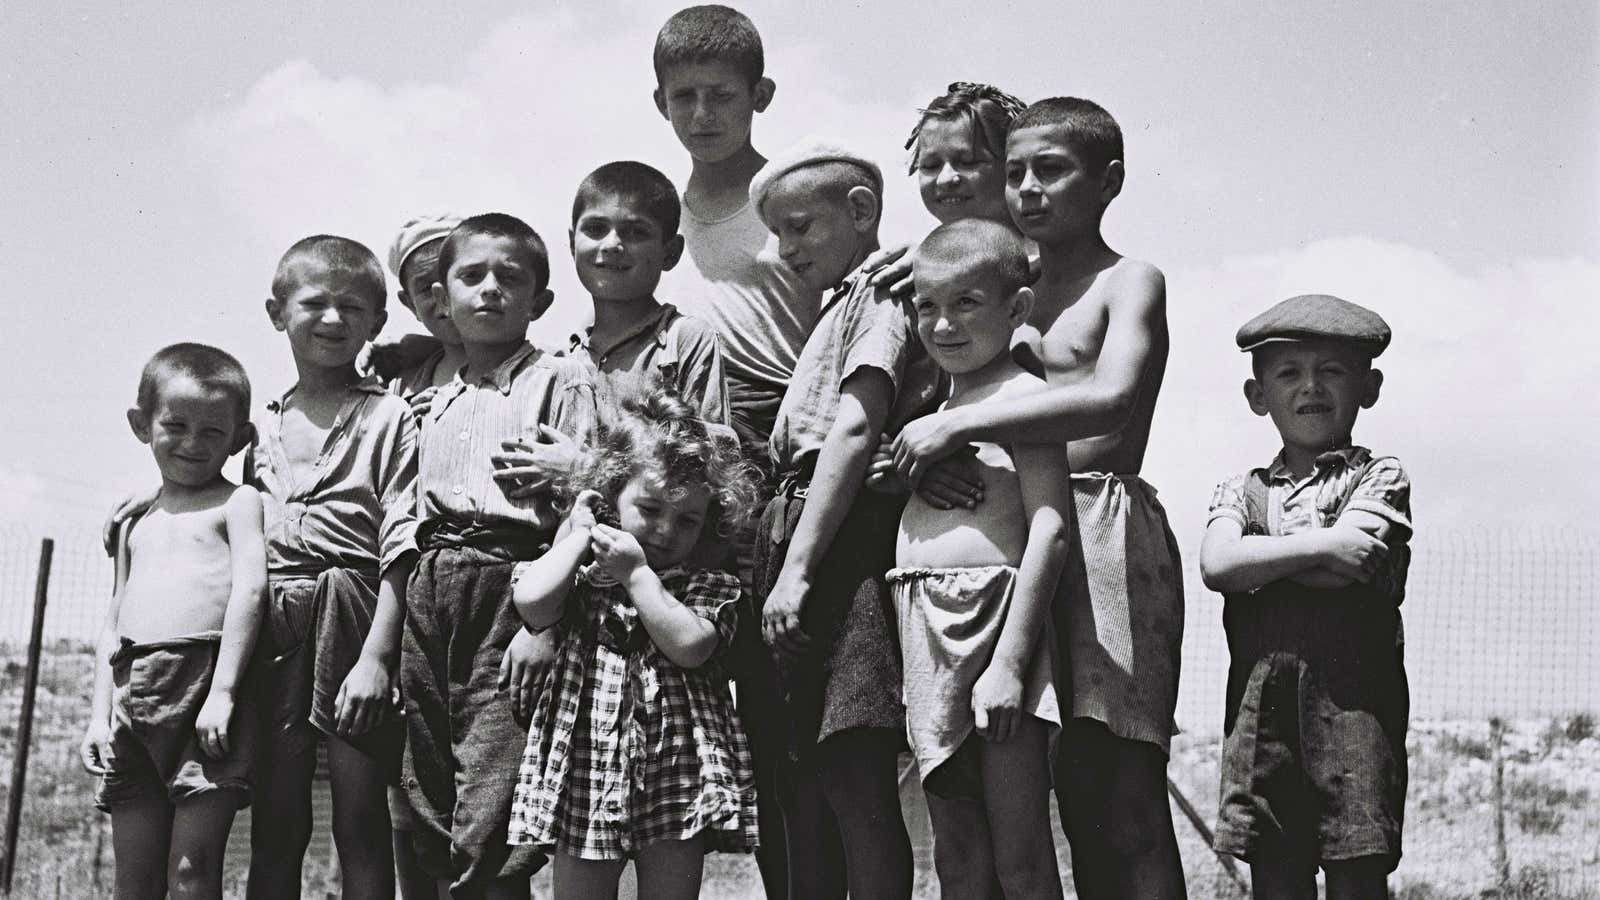 Jewish orphans who survived the Holocaust.